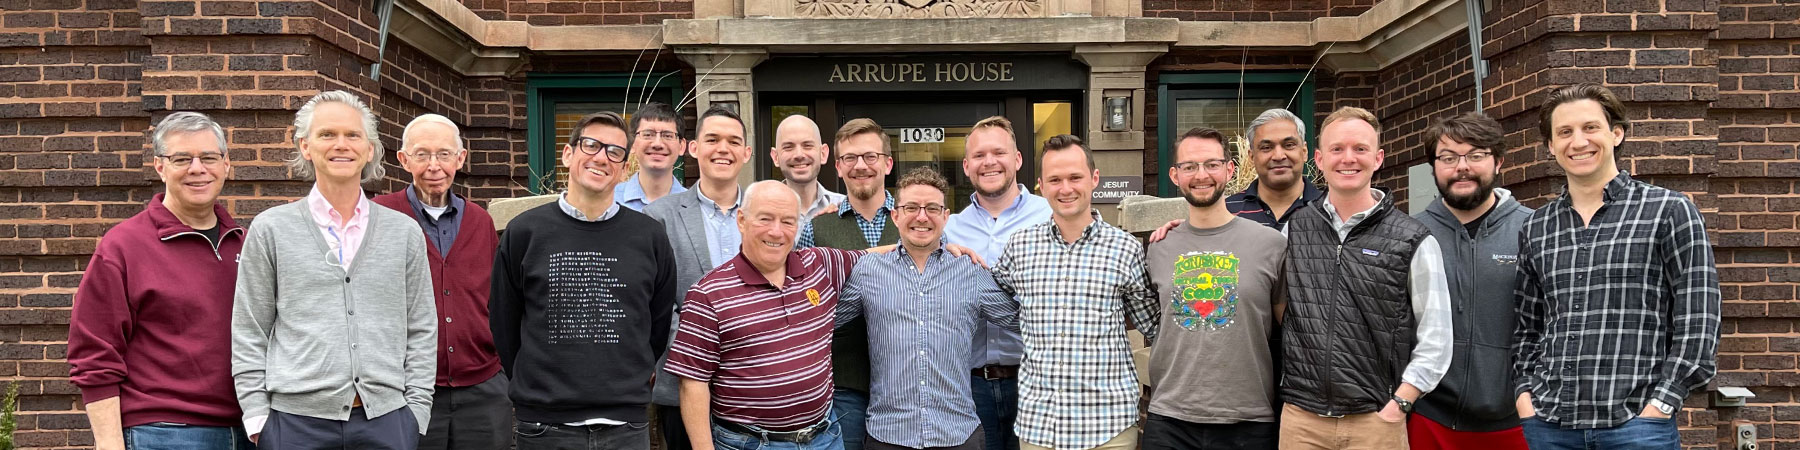 Jesuit First Studies group in front of the Arrupe House.